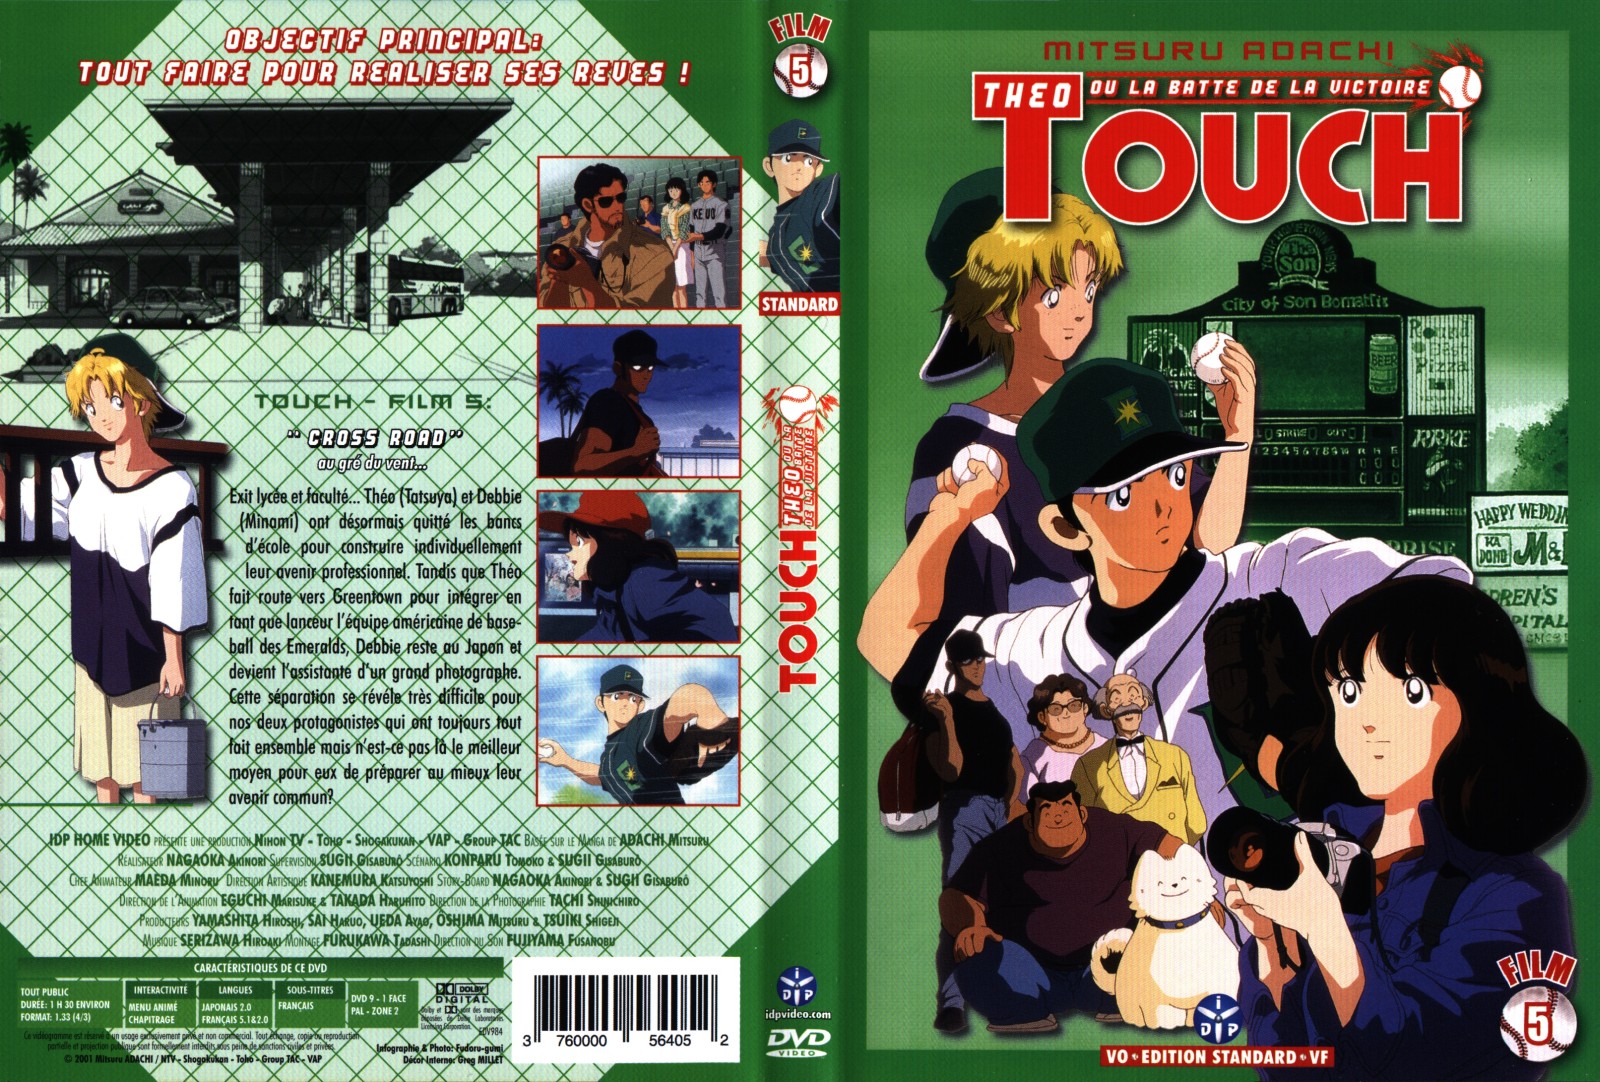 Jaquette DVD Touch film 5